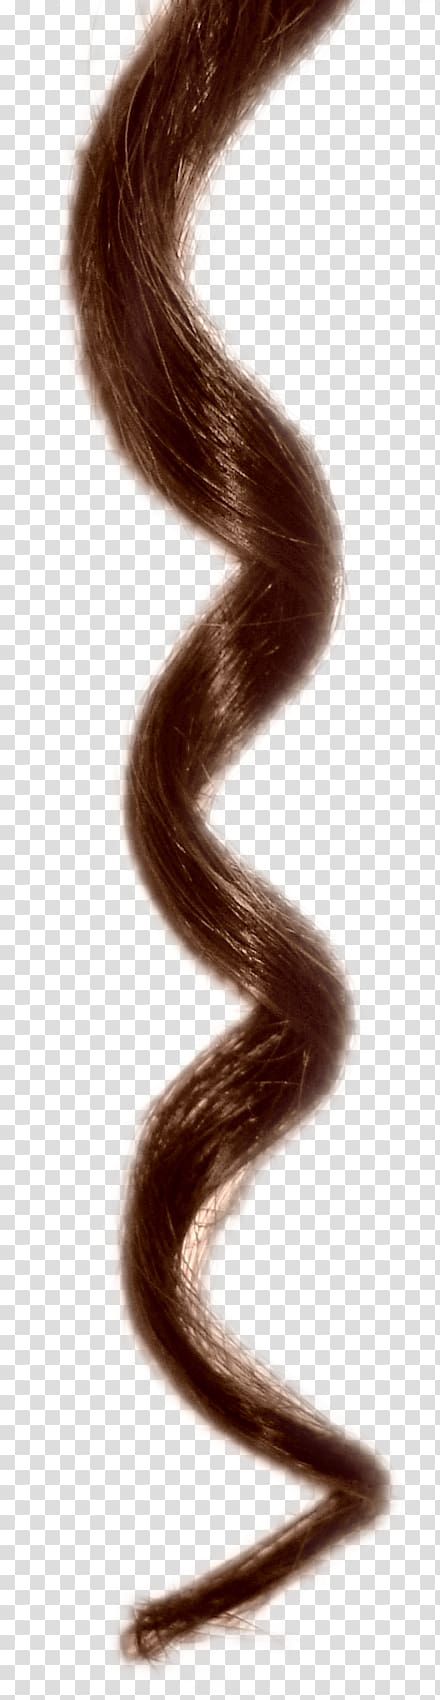 Hair , hair curls transparent background PNG clipart